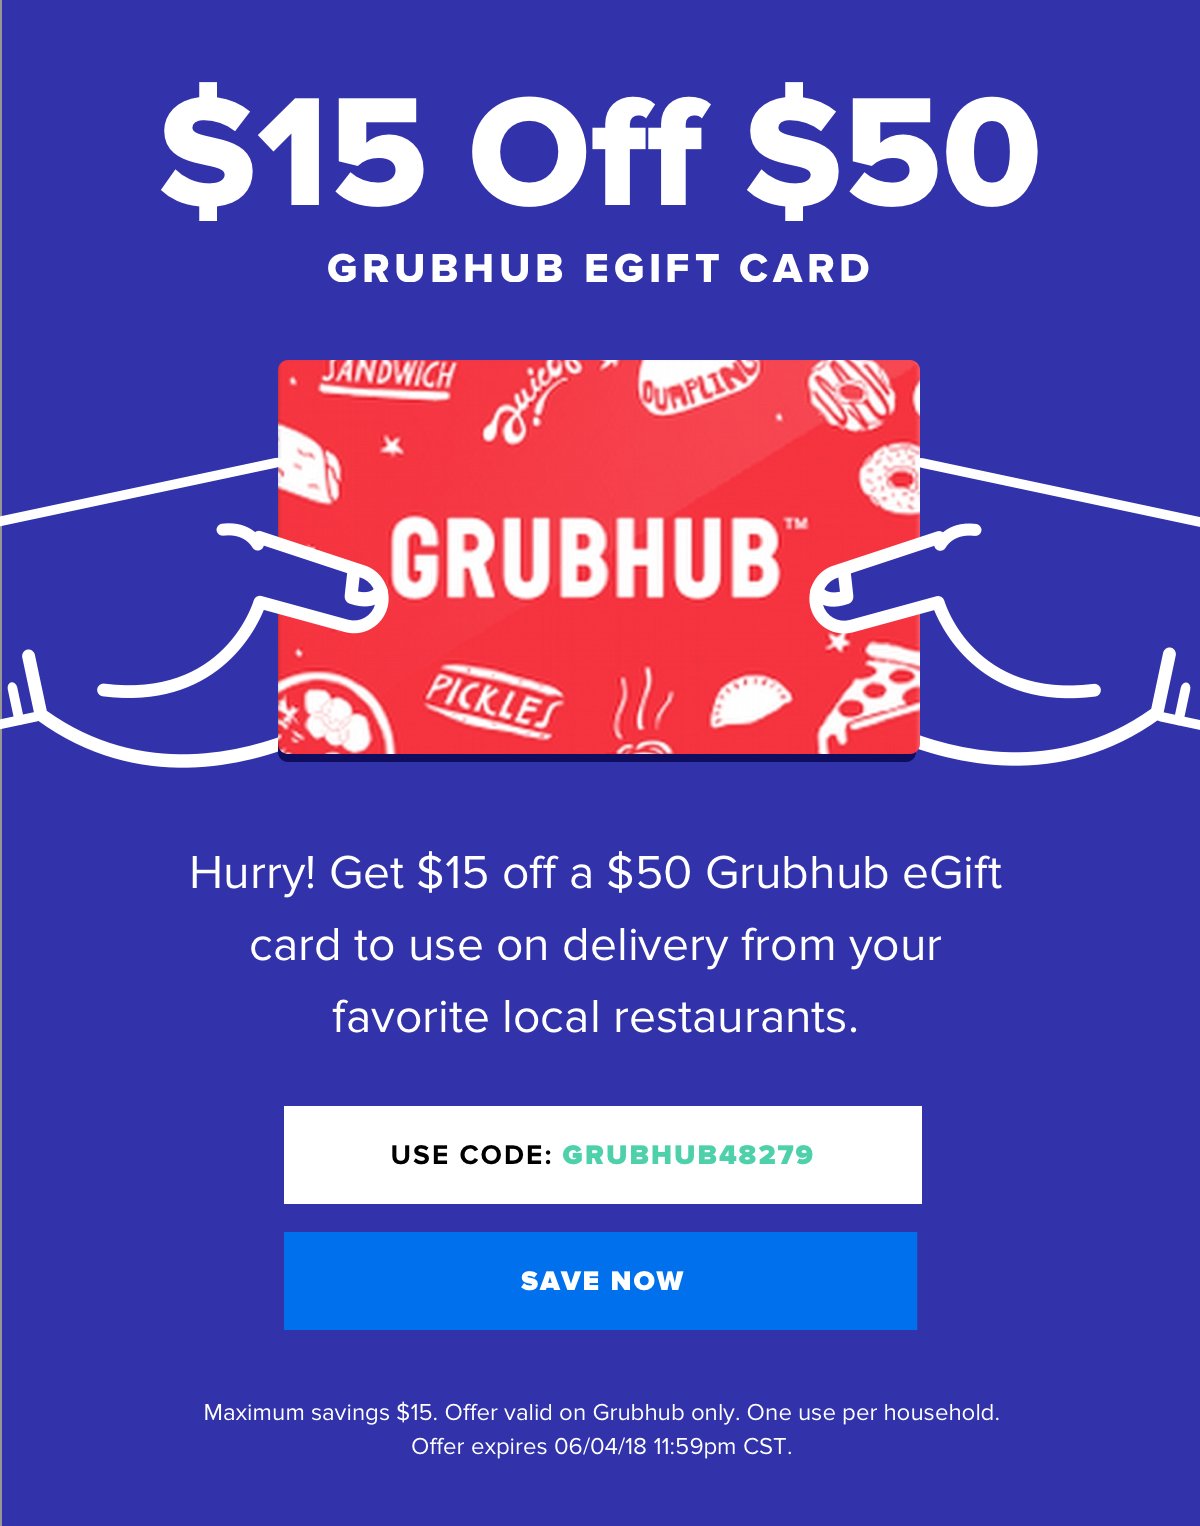 is seamless owned by grubhub